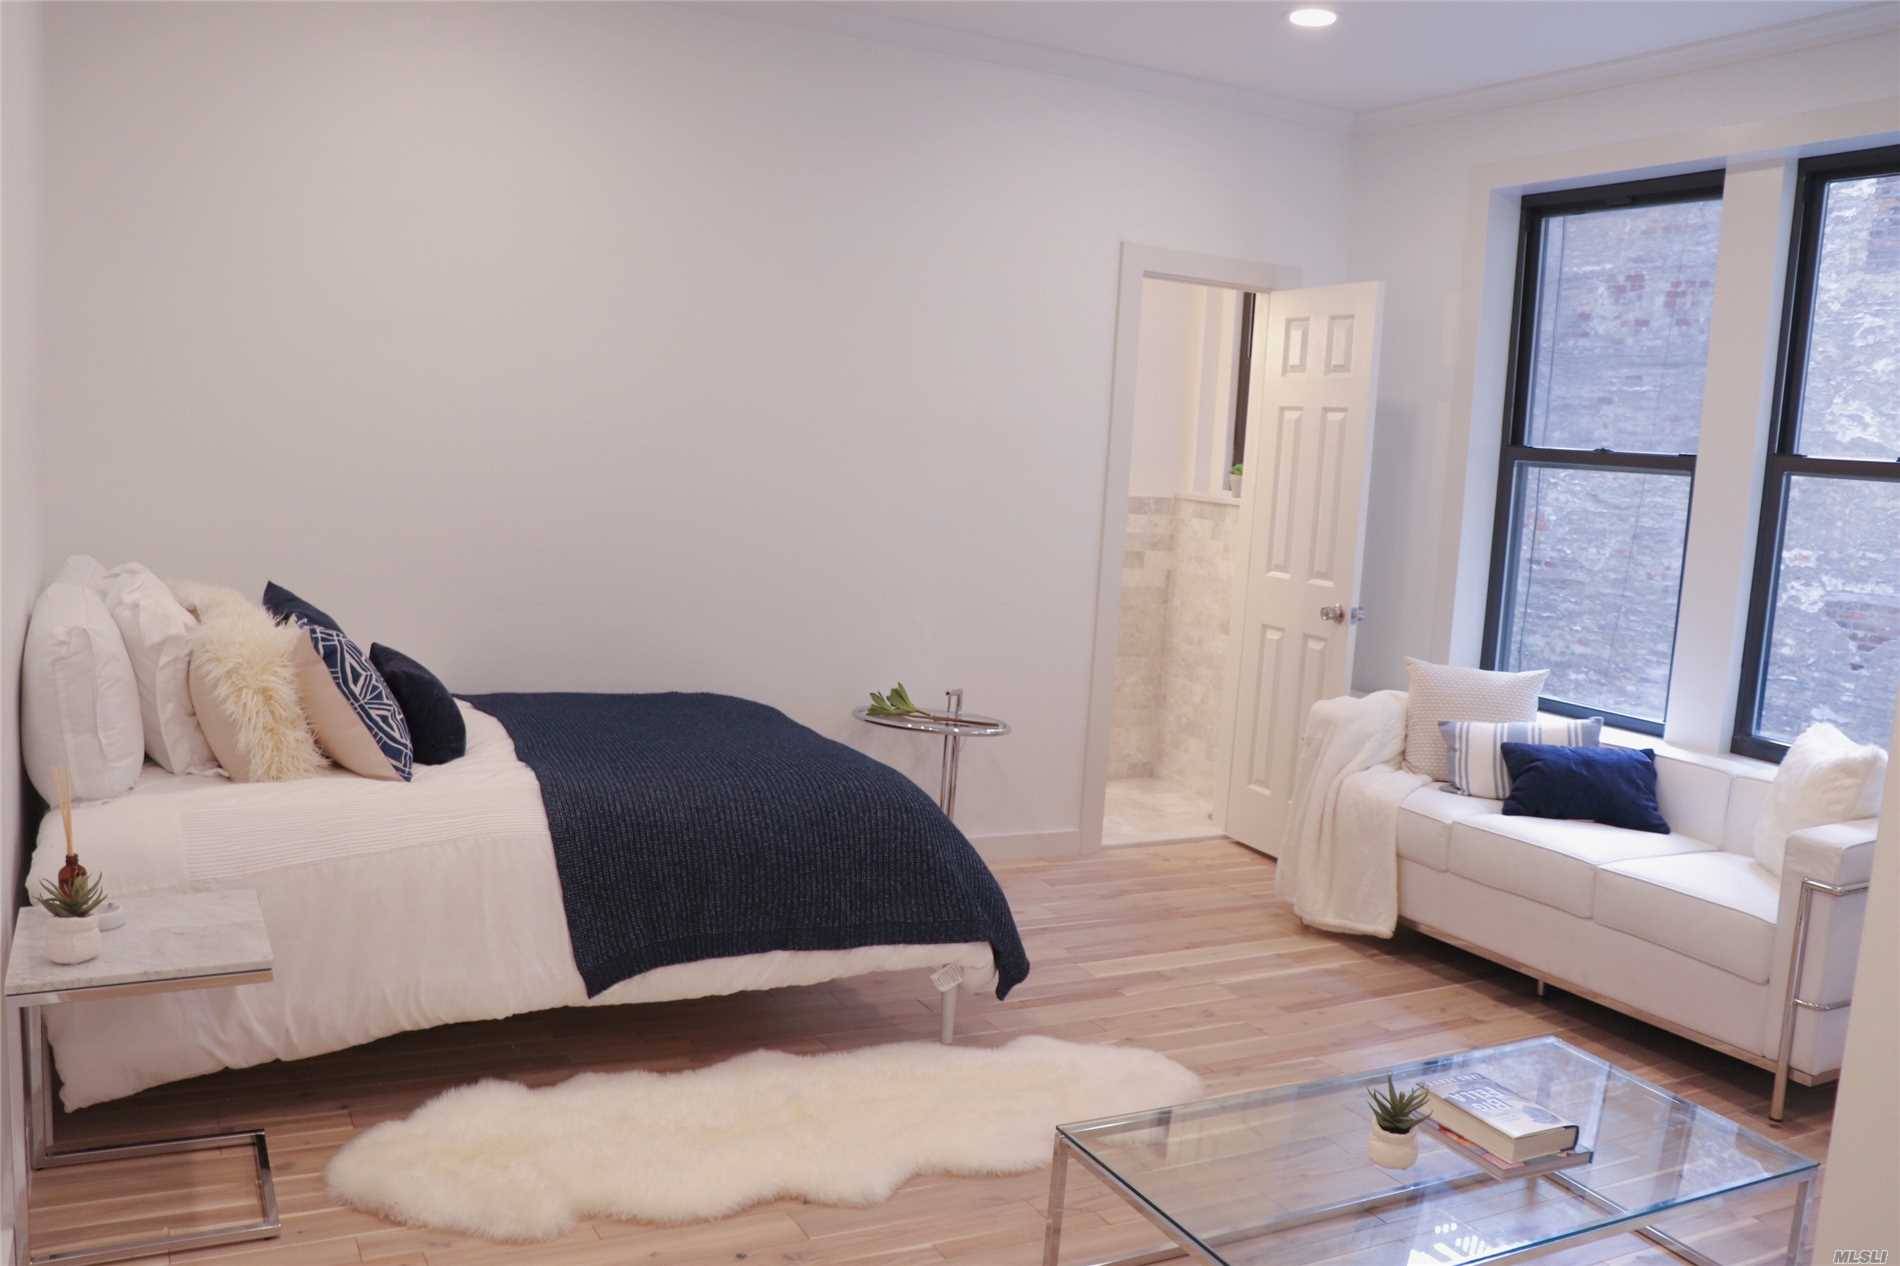 Welcome Home To This Gorgeous Fully Renovated Studio In The West Village.